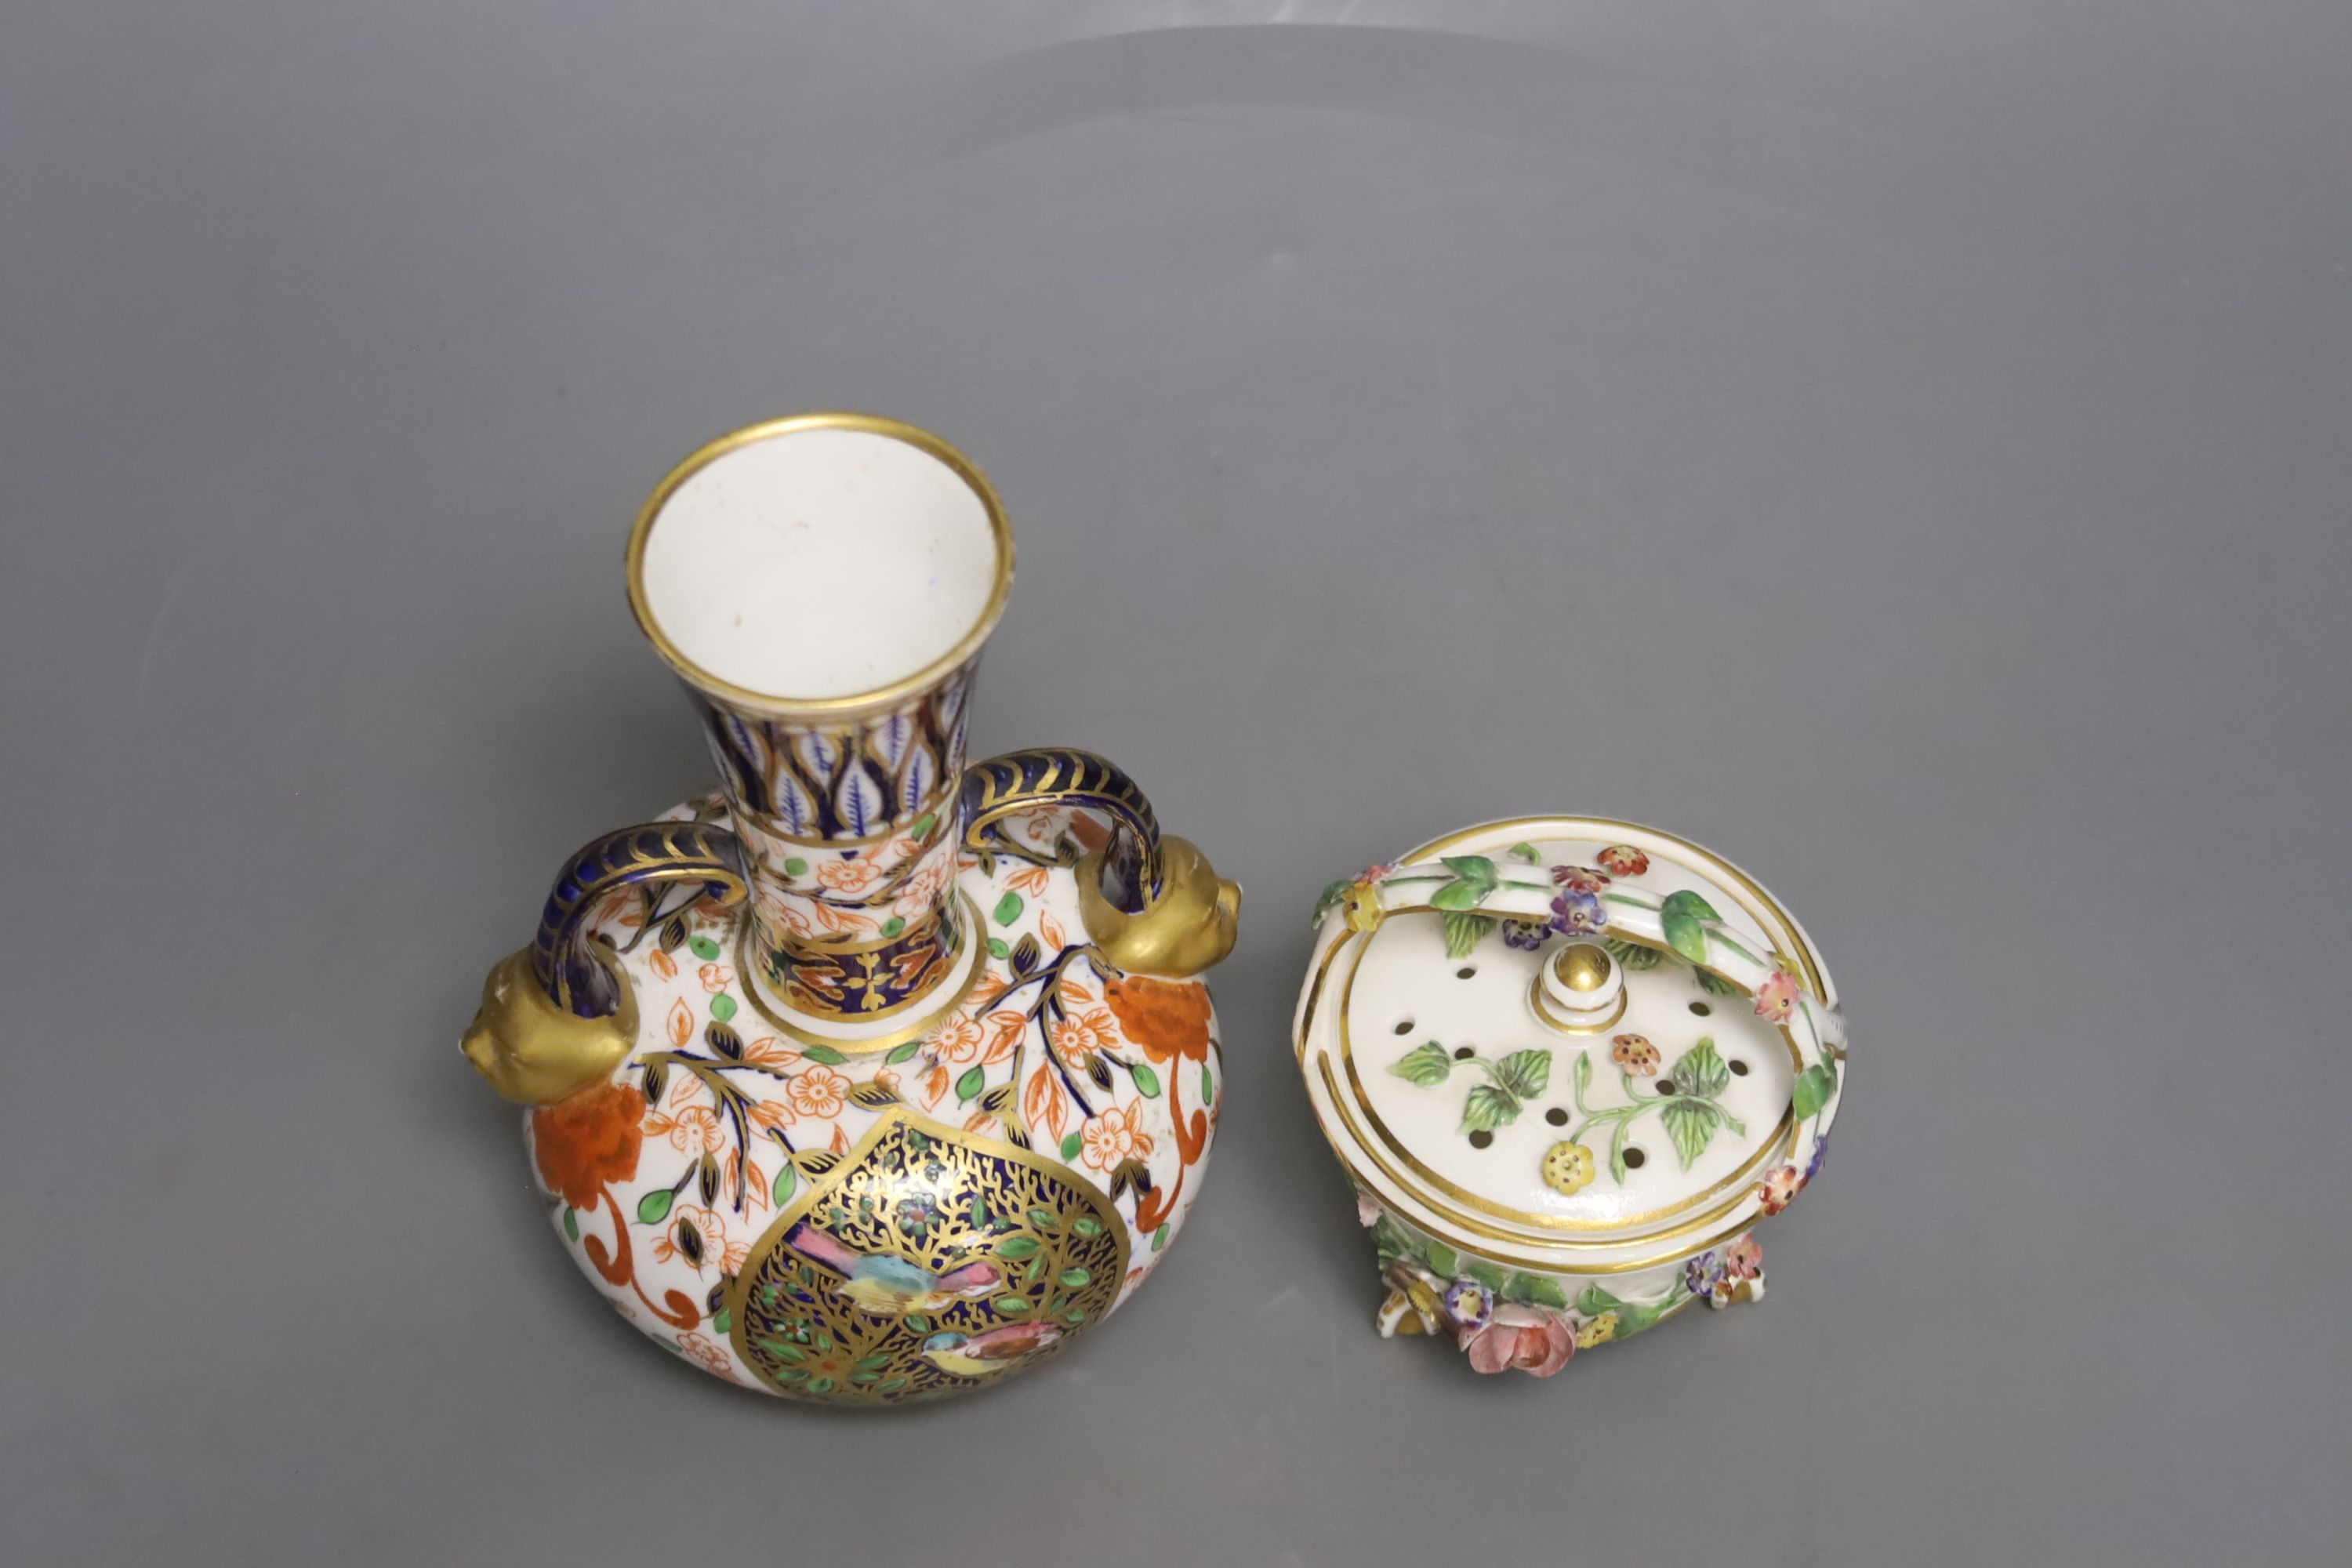 A Royal Crown Derby vase, with two mask head handles painted in Imari style, date code for 1882 and a Derby King Street pot pourri basket and cover c.1900, tallest 16cm